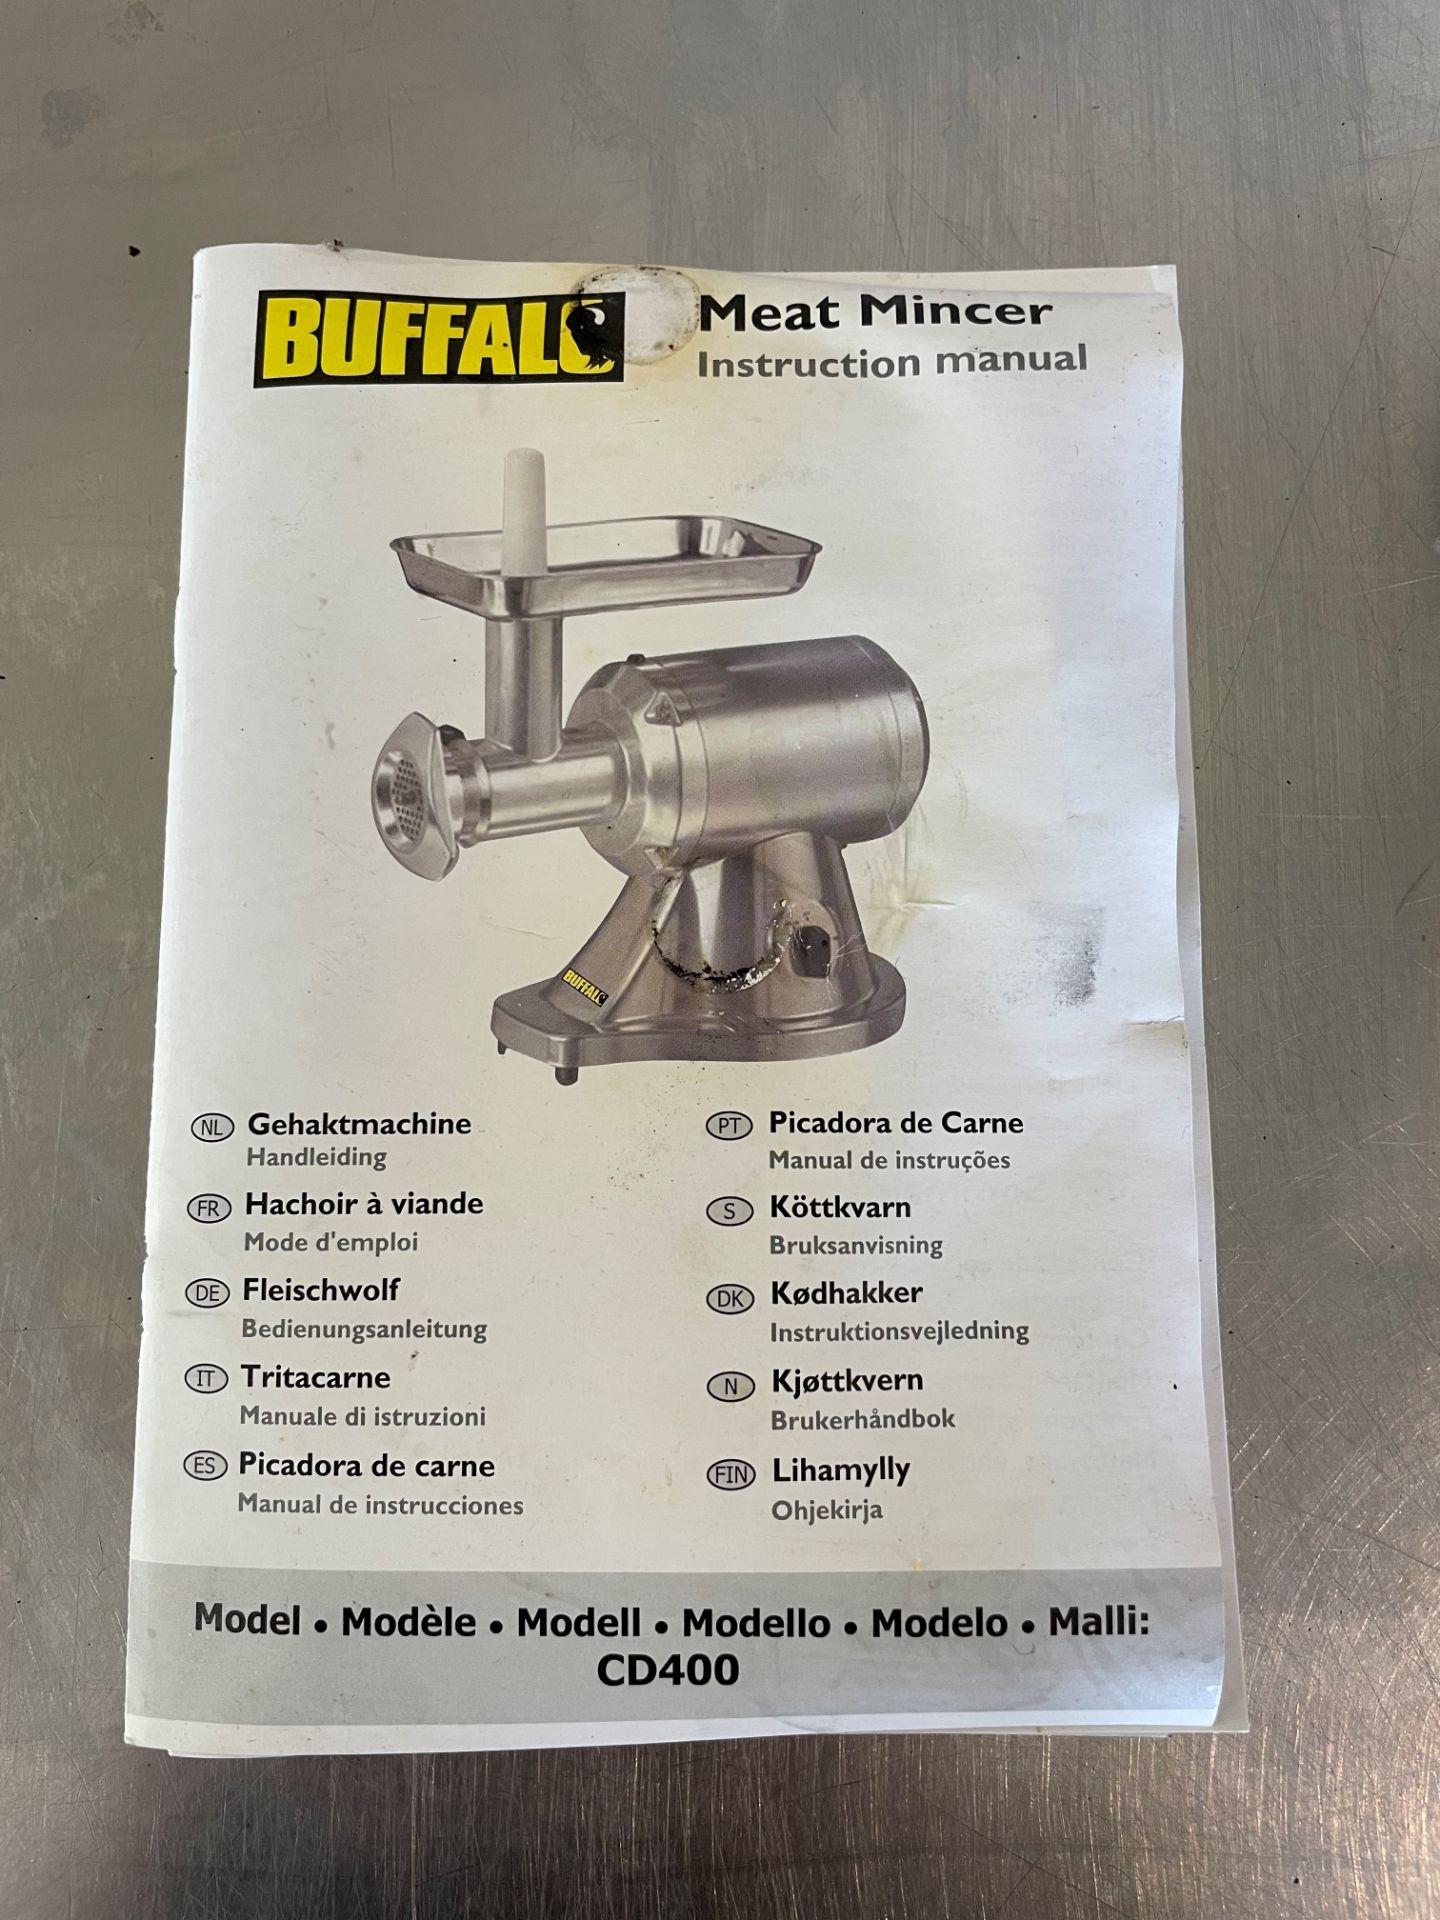 Buffalo CD400 Heavy Duty Meat Mincer. Safely mince, grind, and process up to 250kg of food per - Image 10 of 10